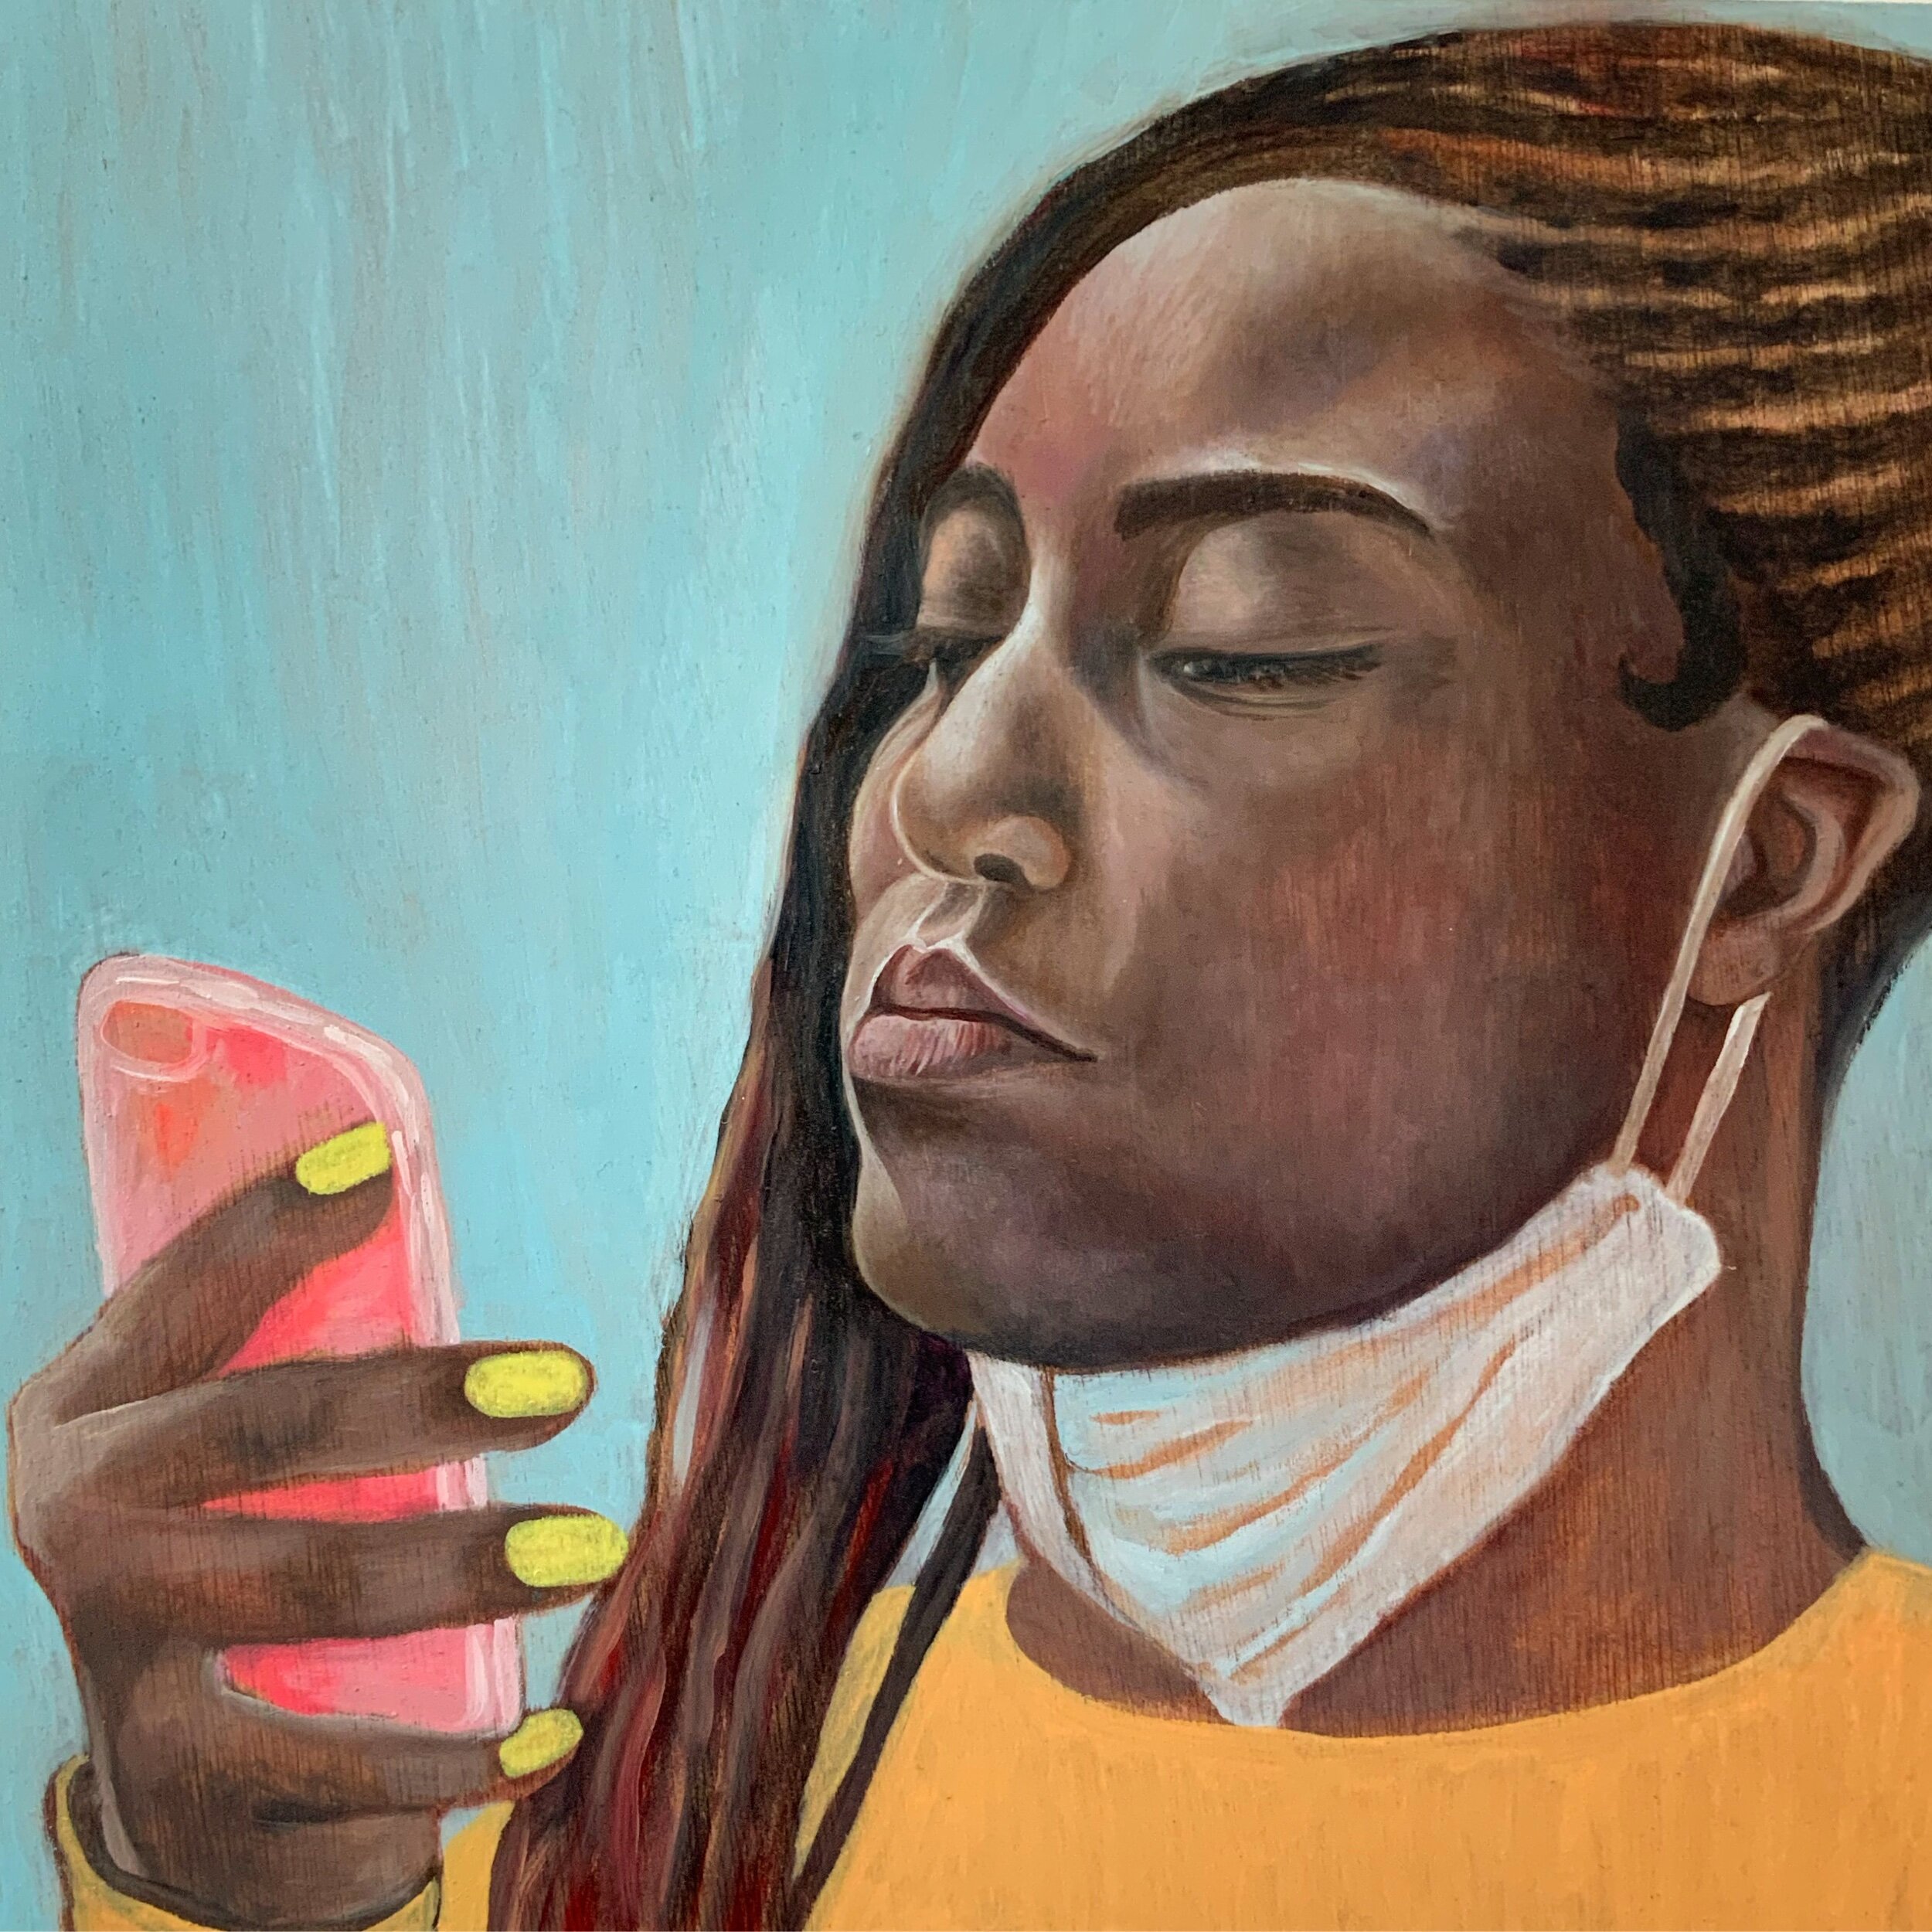   Miracle Boyd , 2020  Oil on plywood  30 x 30cm 